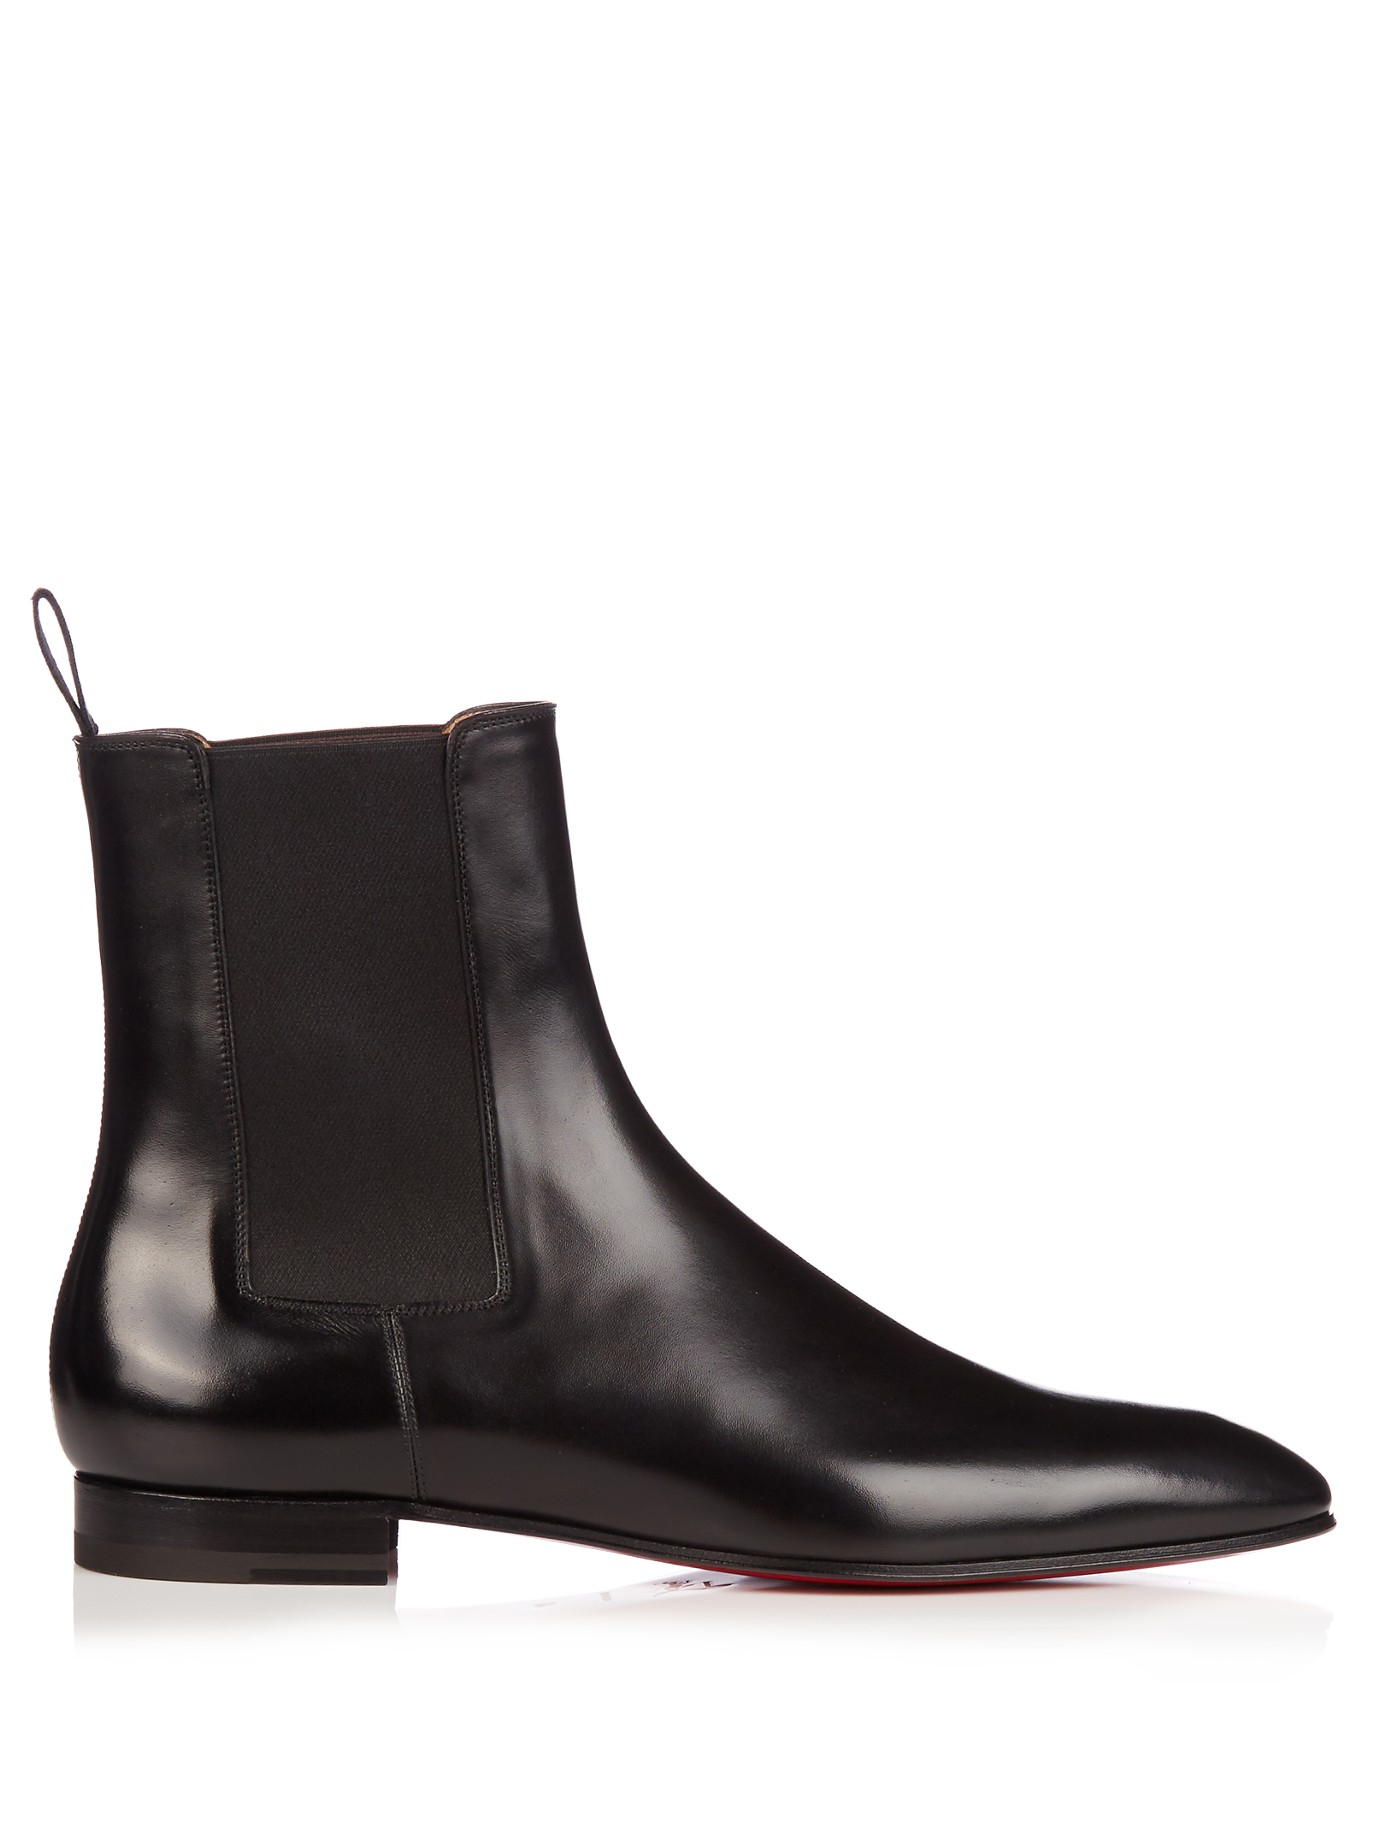 Lyst - Christian Louboutin Roadie Leather Chelsea Boots in Black for Men